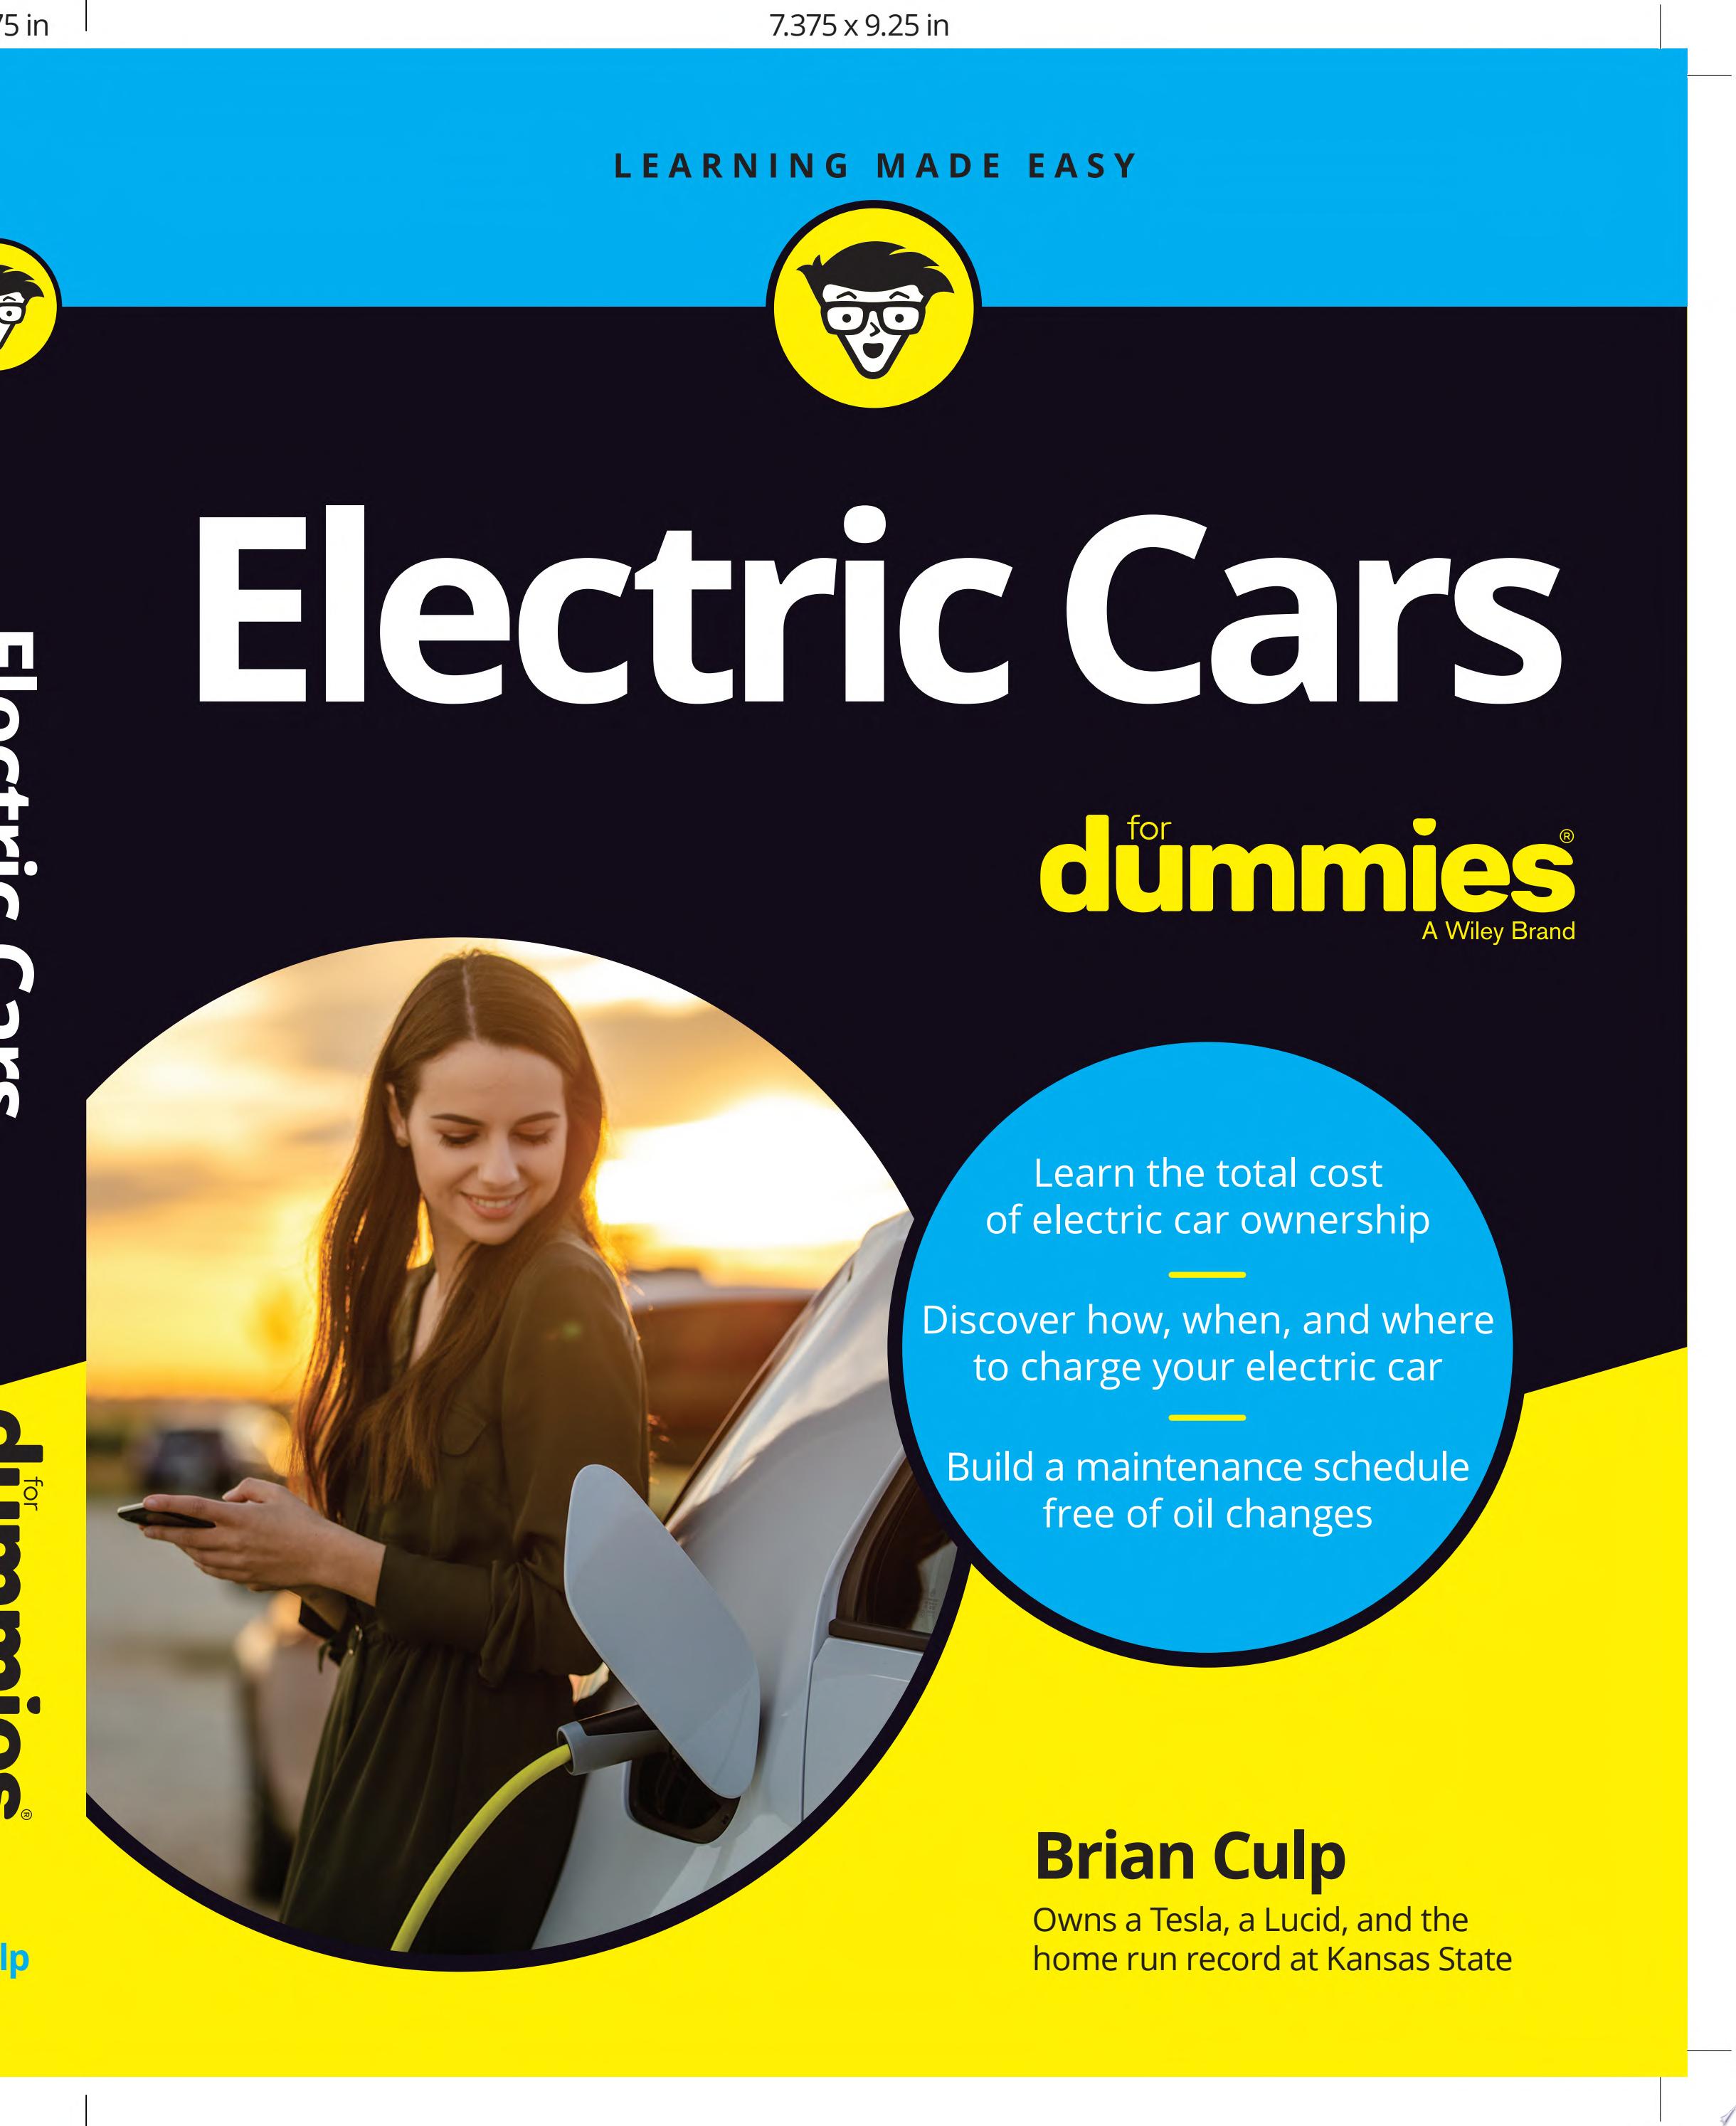 Image for "Electric Cars For Dummies"